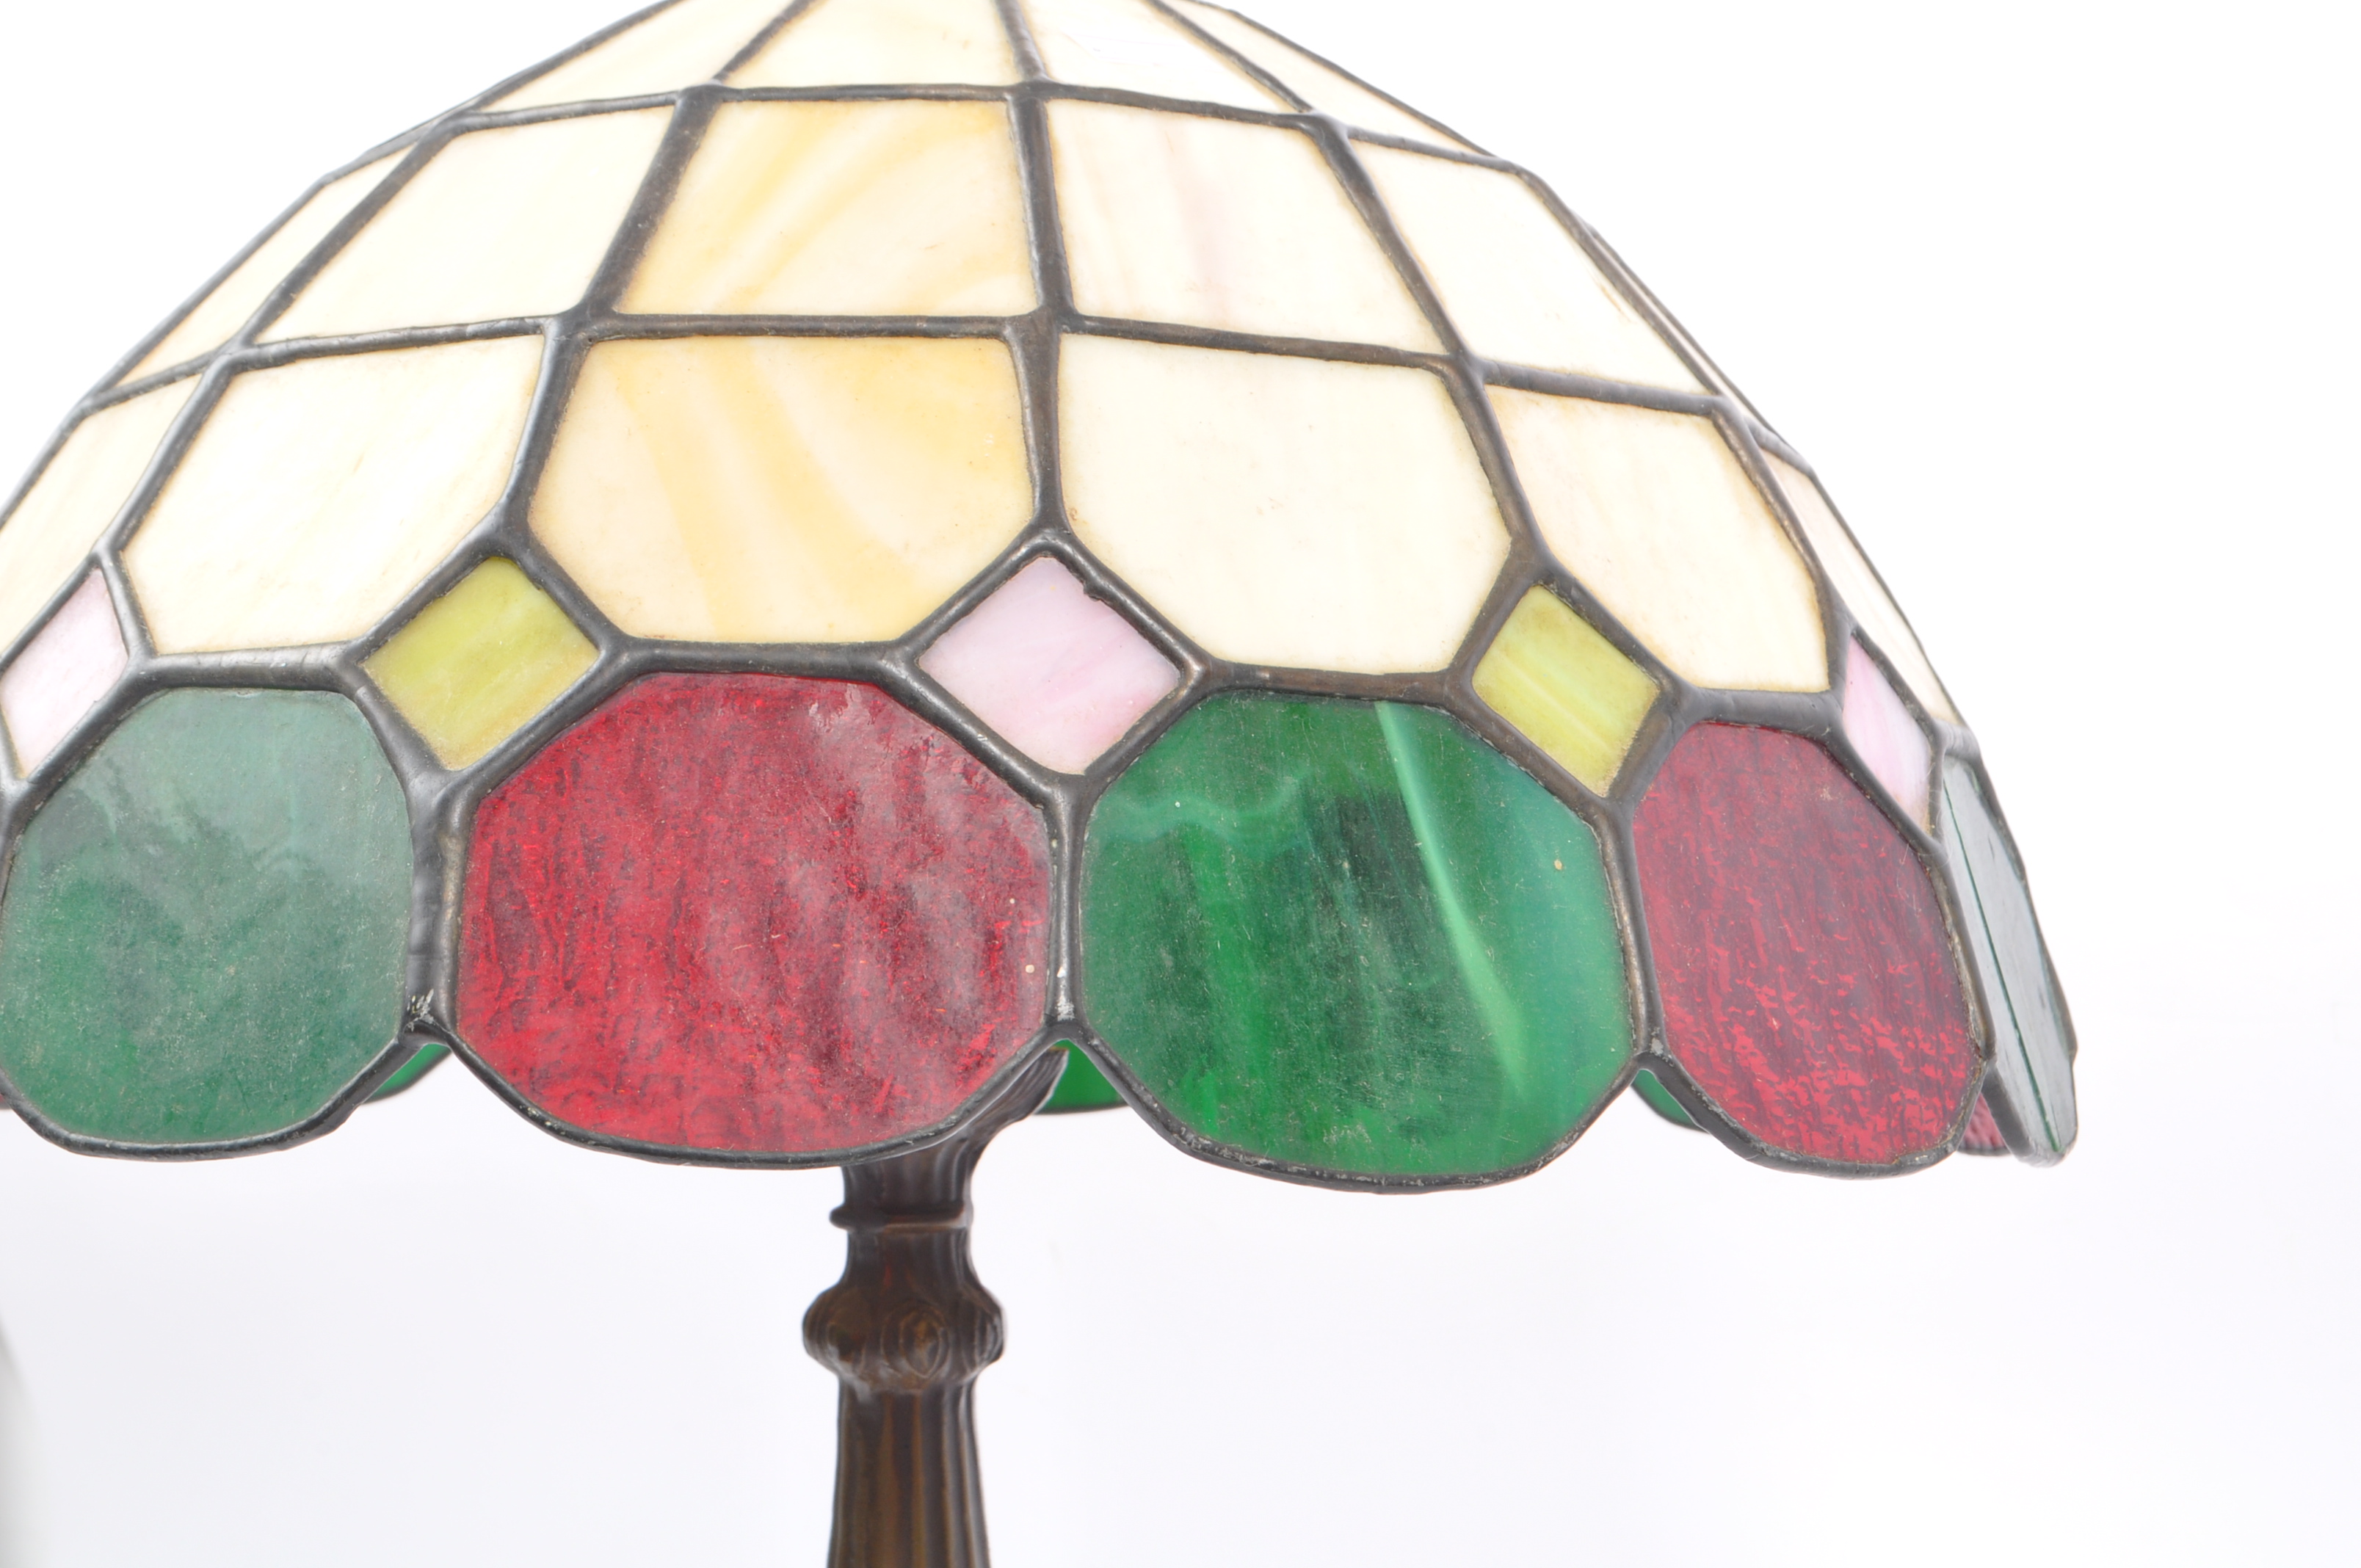 TIFFANY STYLE - 20TH CENTURY TIFFANY STYLE BISTRO TABLE LAMP - Image 4 of 5